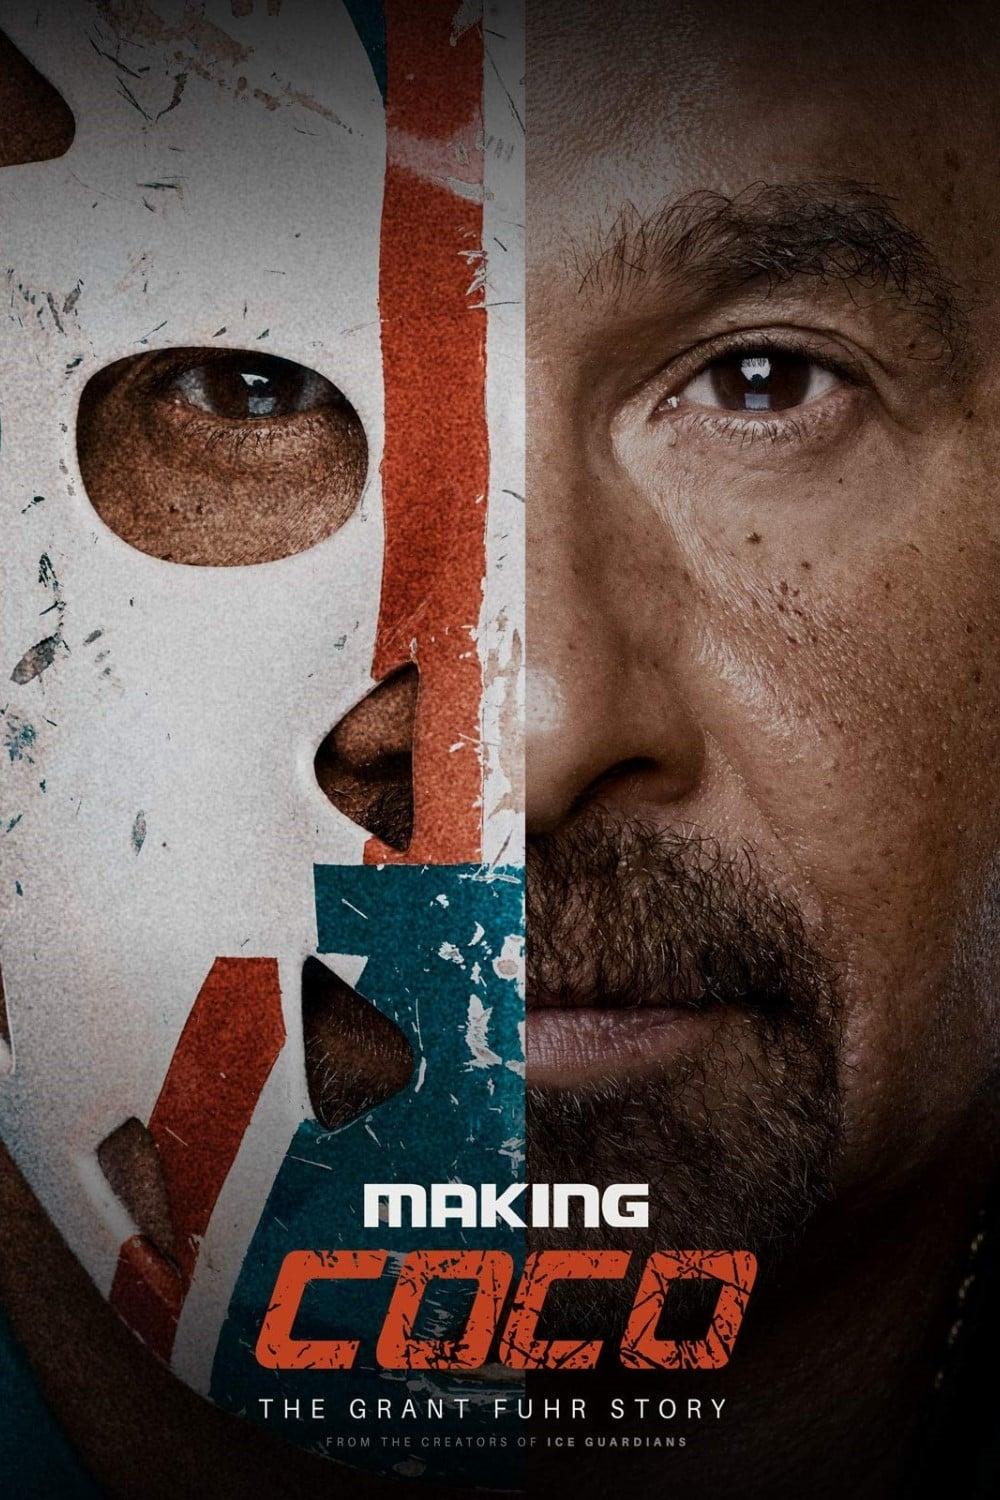 Making Coco: The Grant Fuhr Story poster